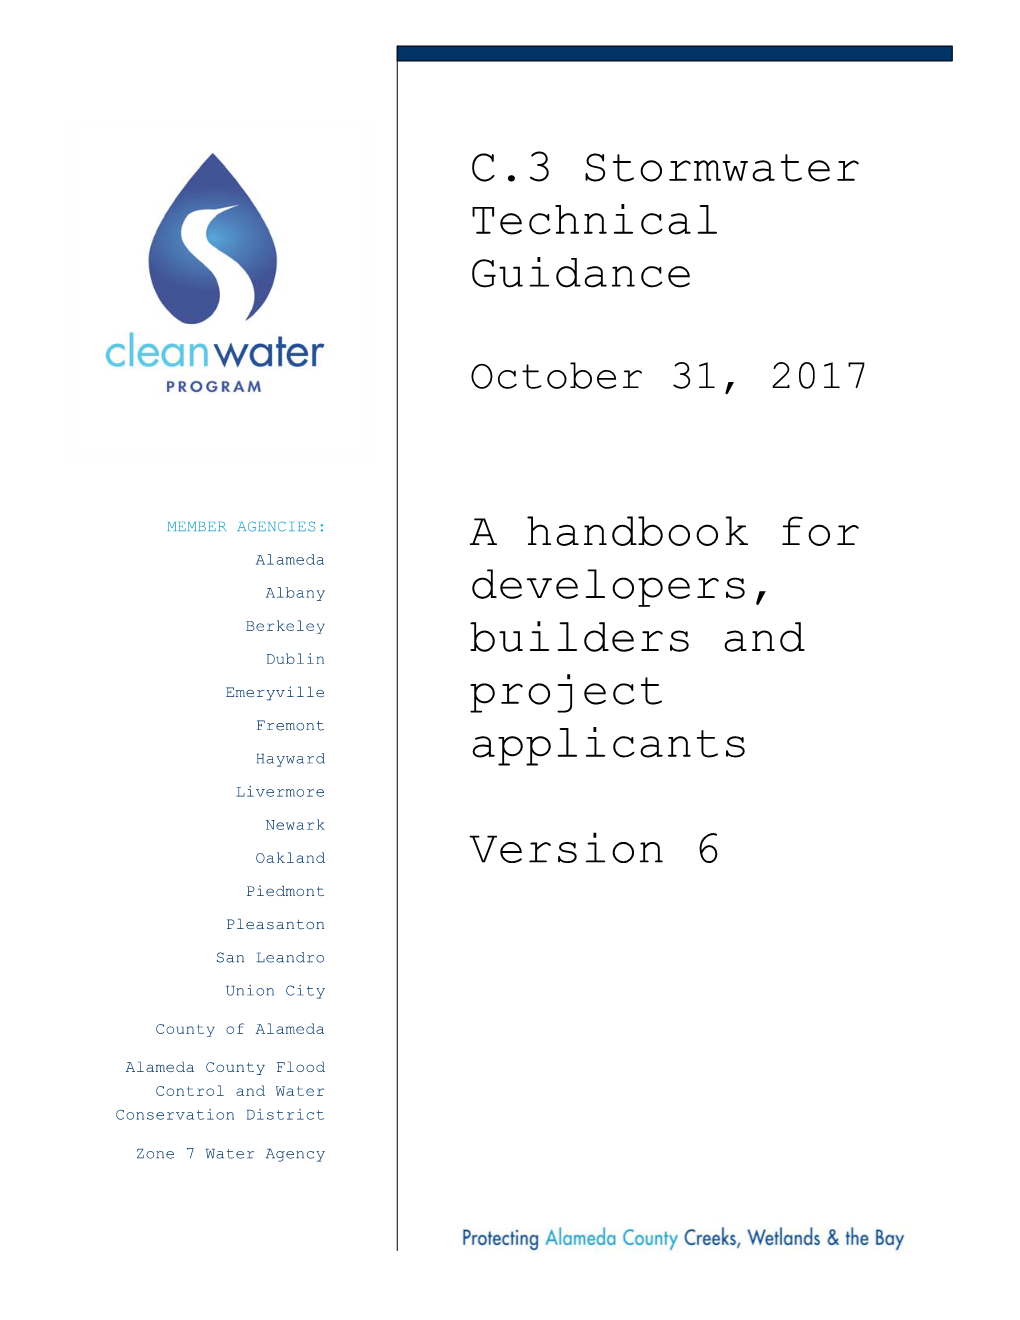 C.3 Stormwater Technical Guidance